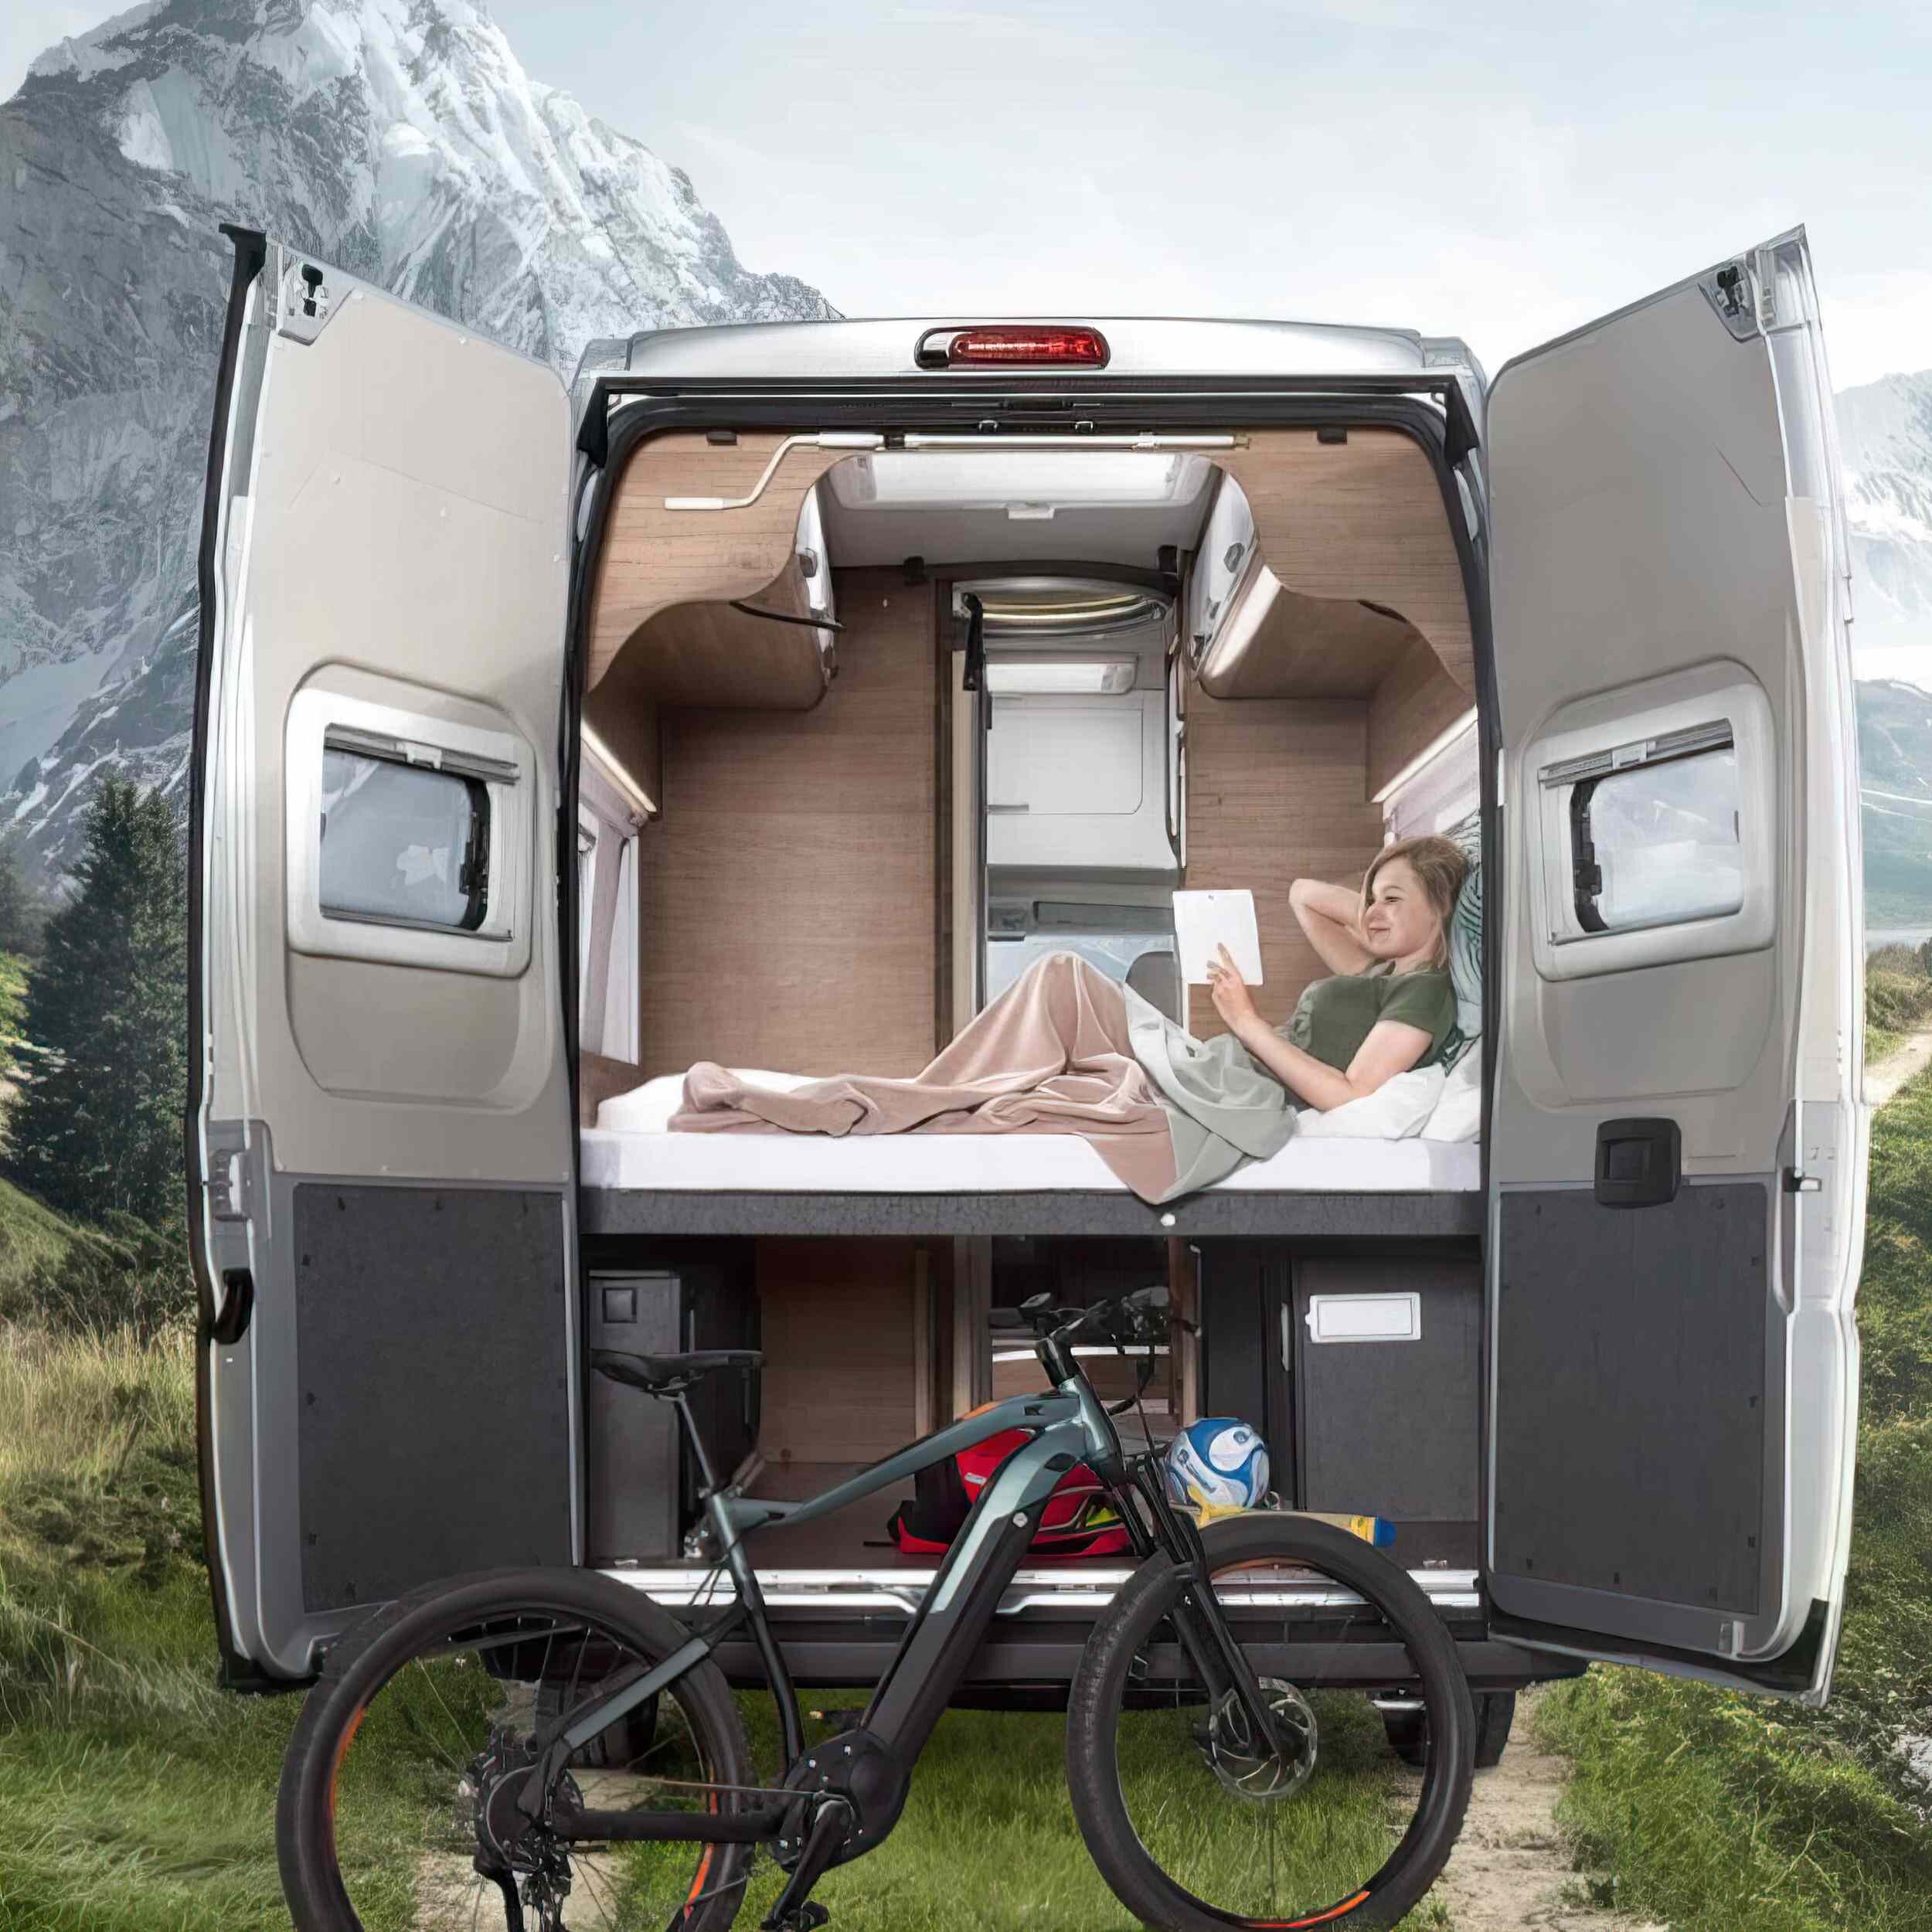  If that wasn't impressive enough, the van's multifunctional furniture also allows campers to pack in bikes, boards, and other gear for the trip.  